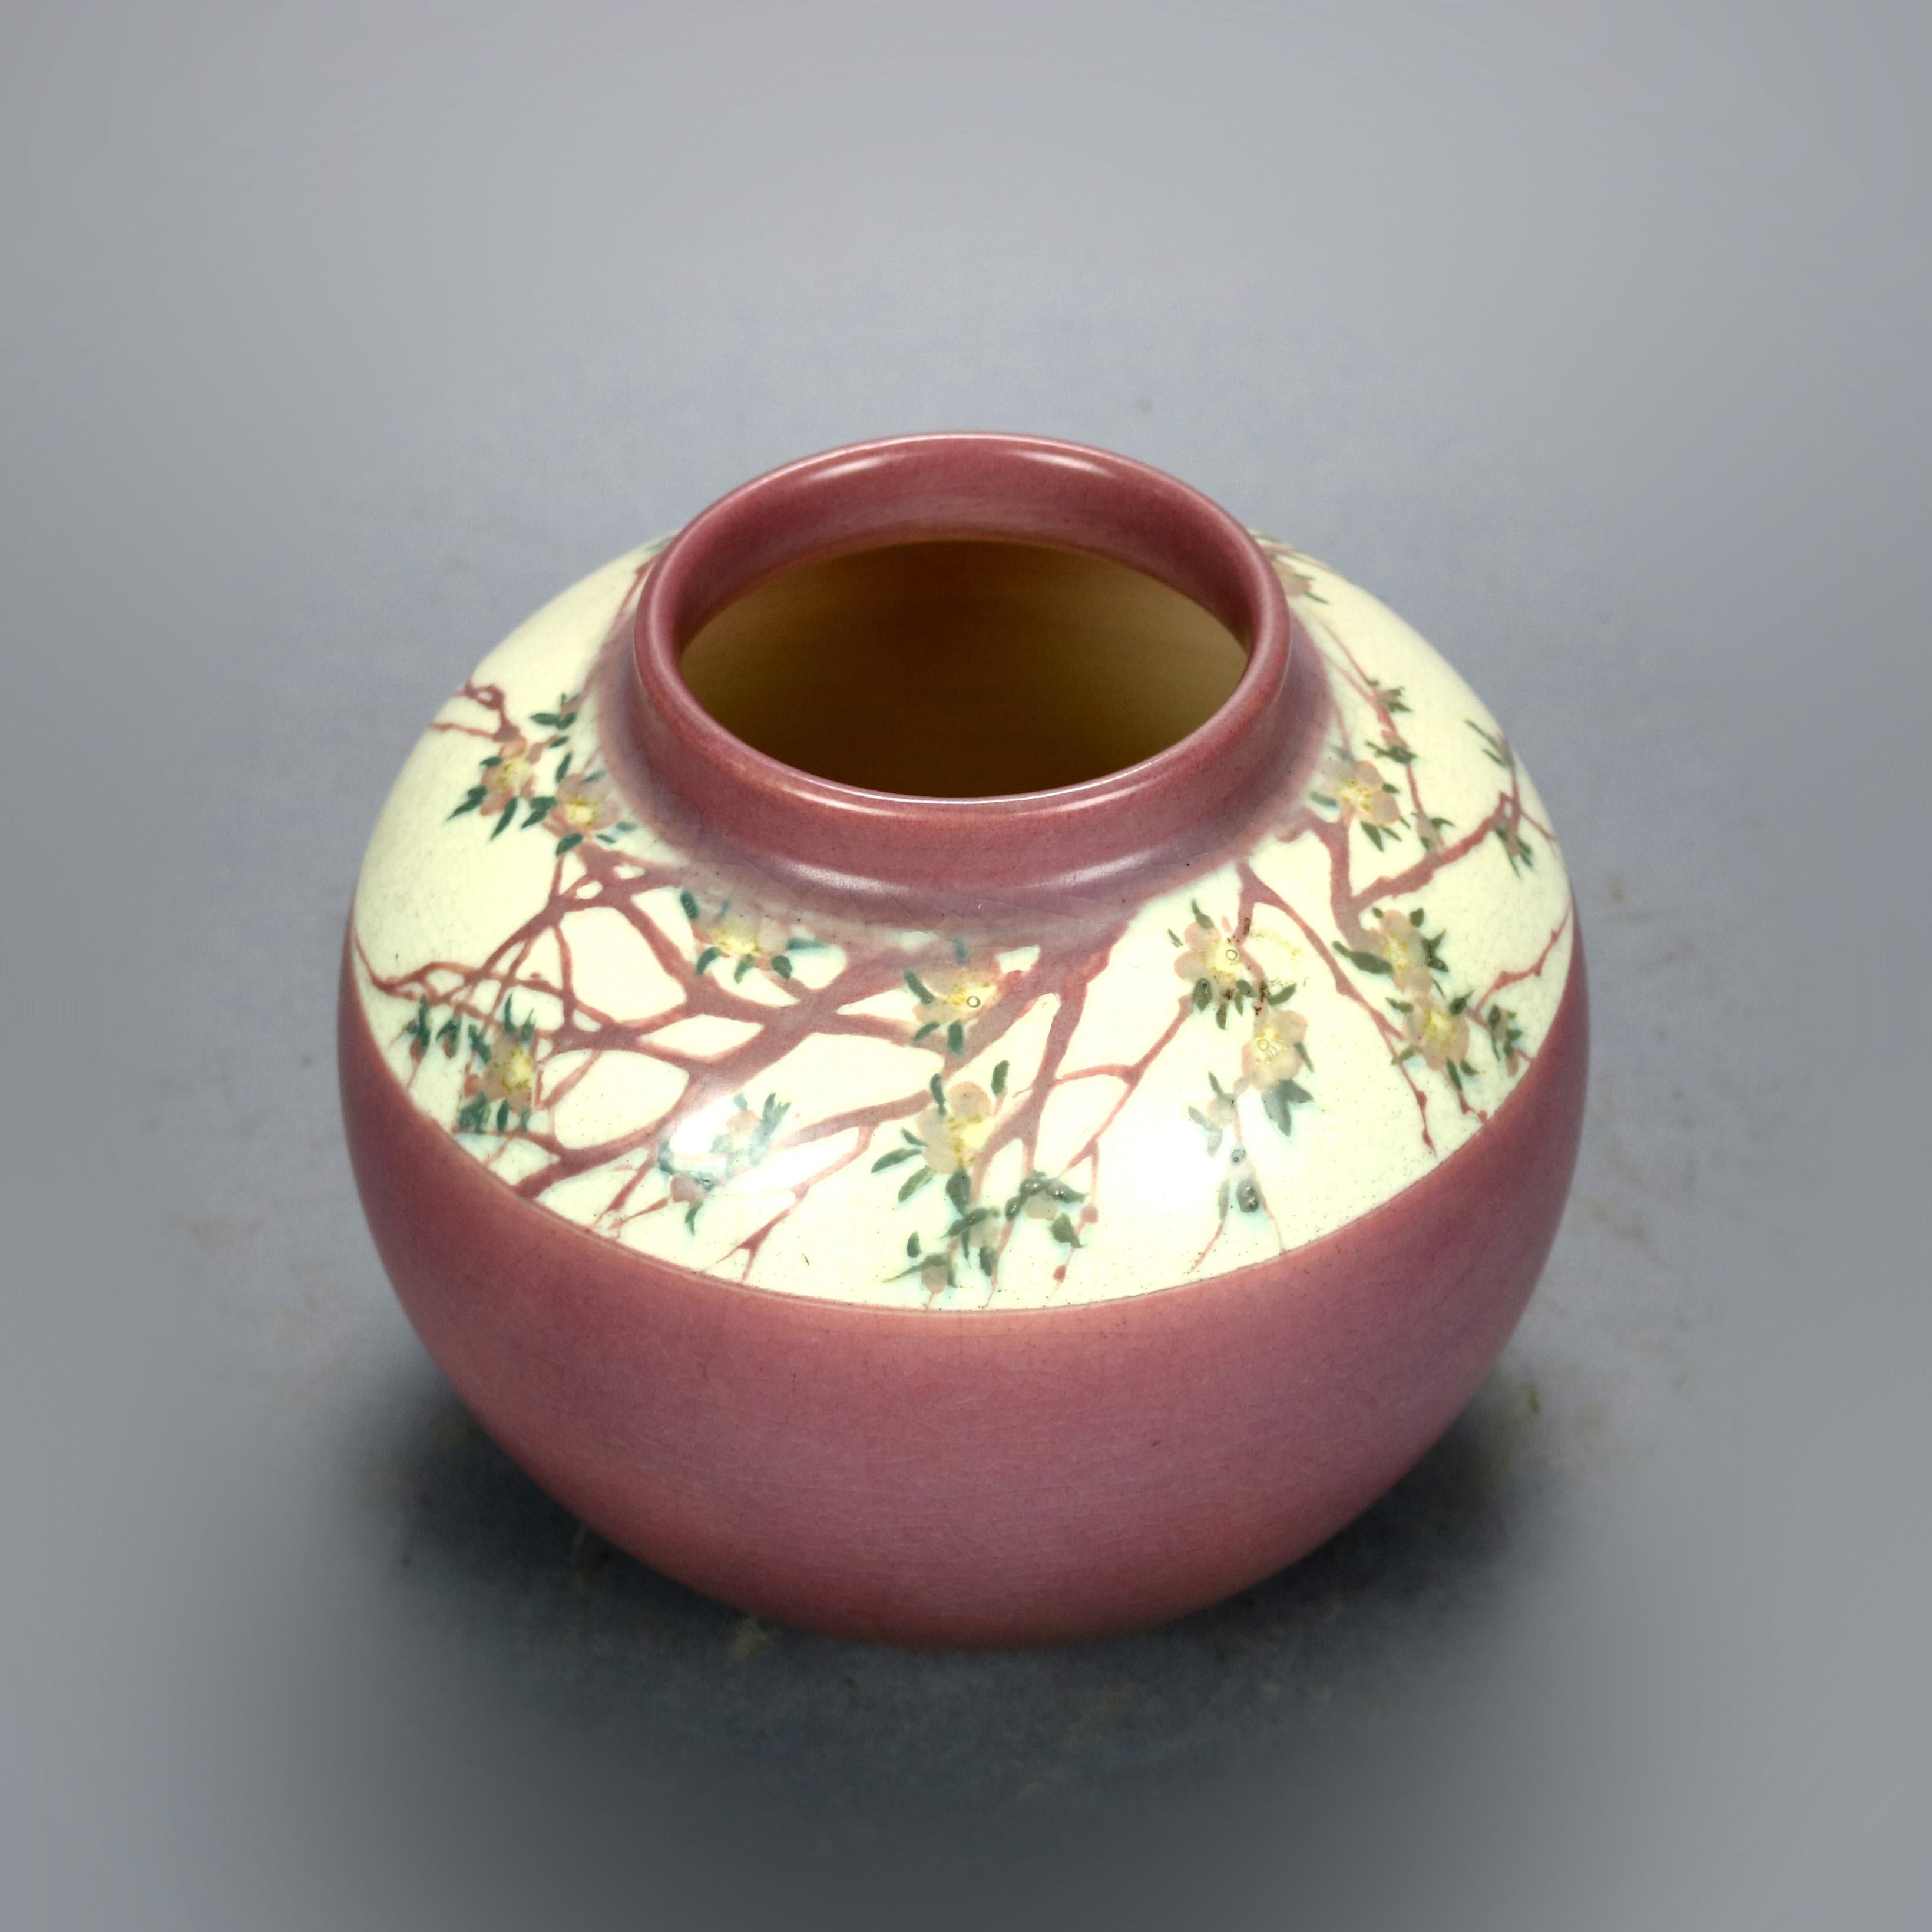 An antique Rookwood art pottery vase by E.T. Hurley offers chunk form with vellum glaze with a hand painted floral band, possibly cherry blossoms, signed on base as photographed, 1915.

Measures: 7